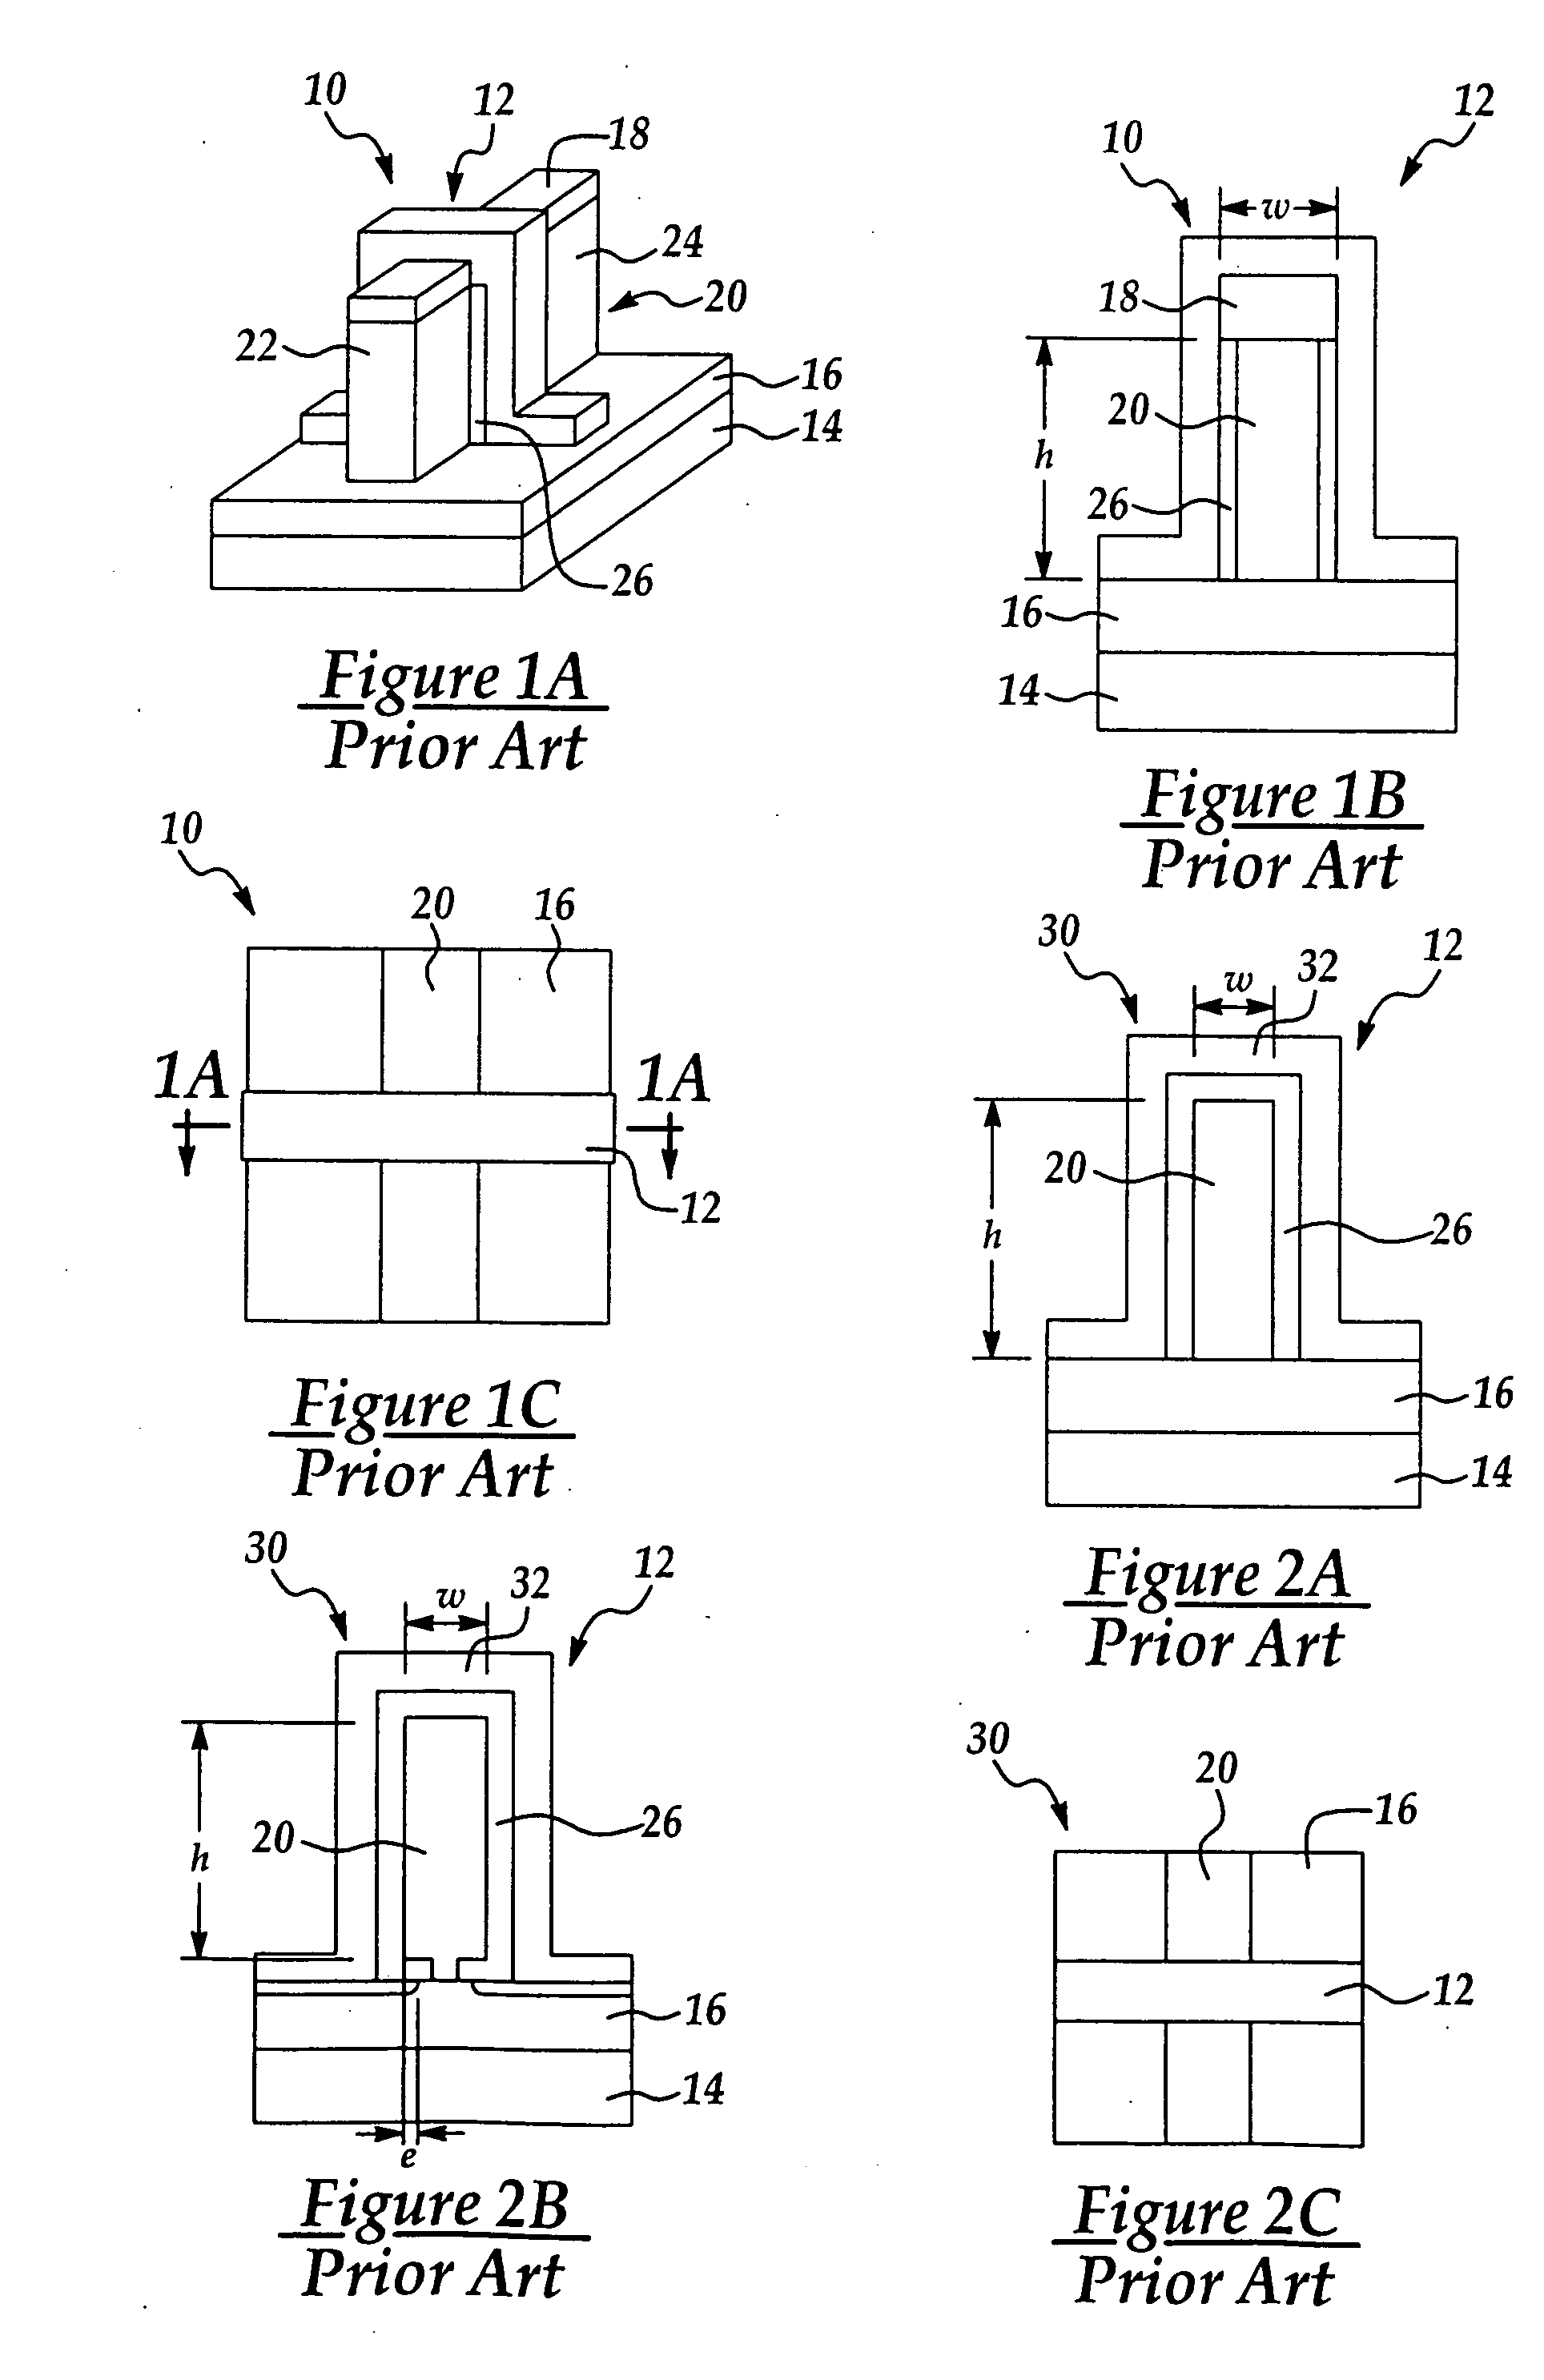 Contacts to semiconductor fin devices